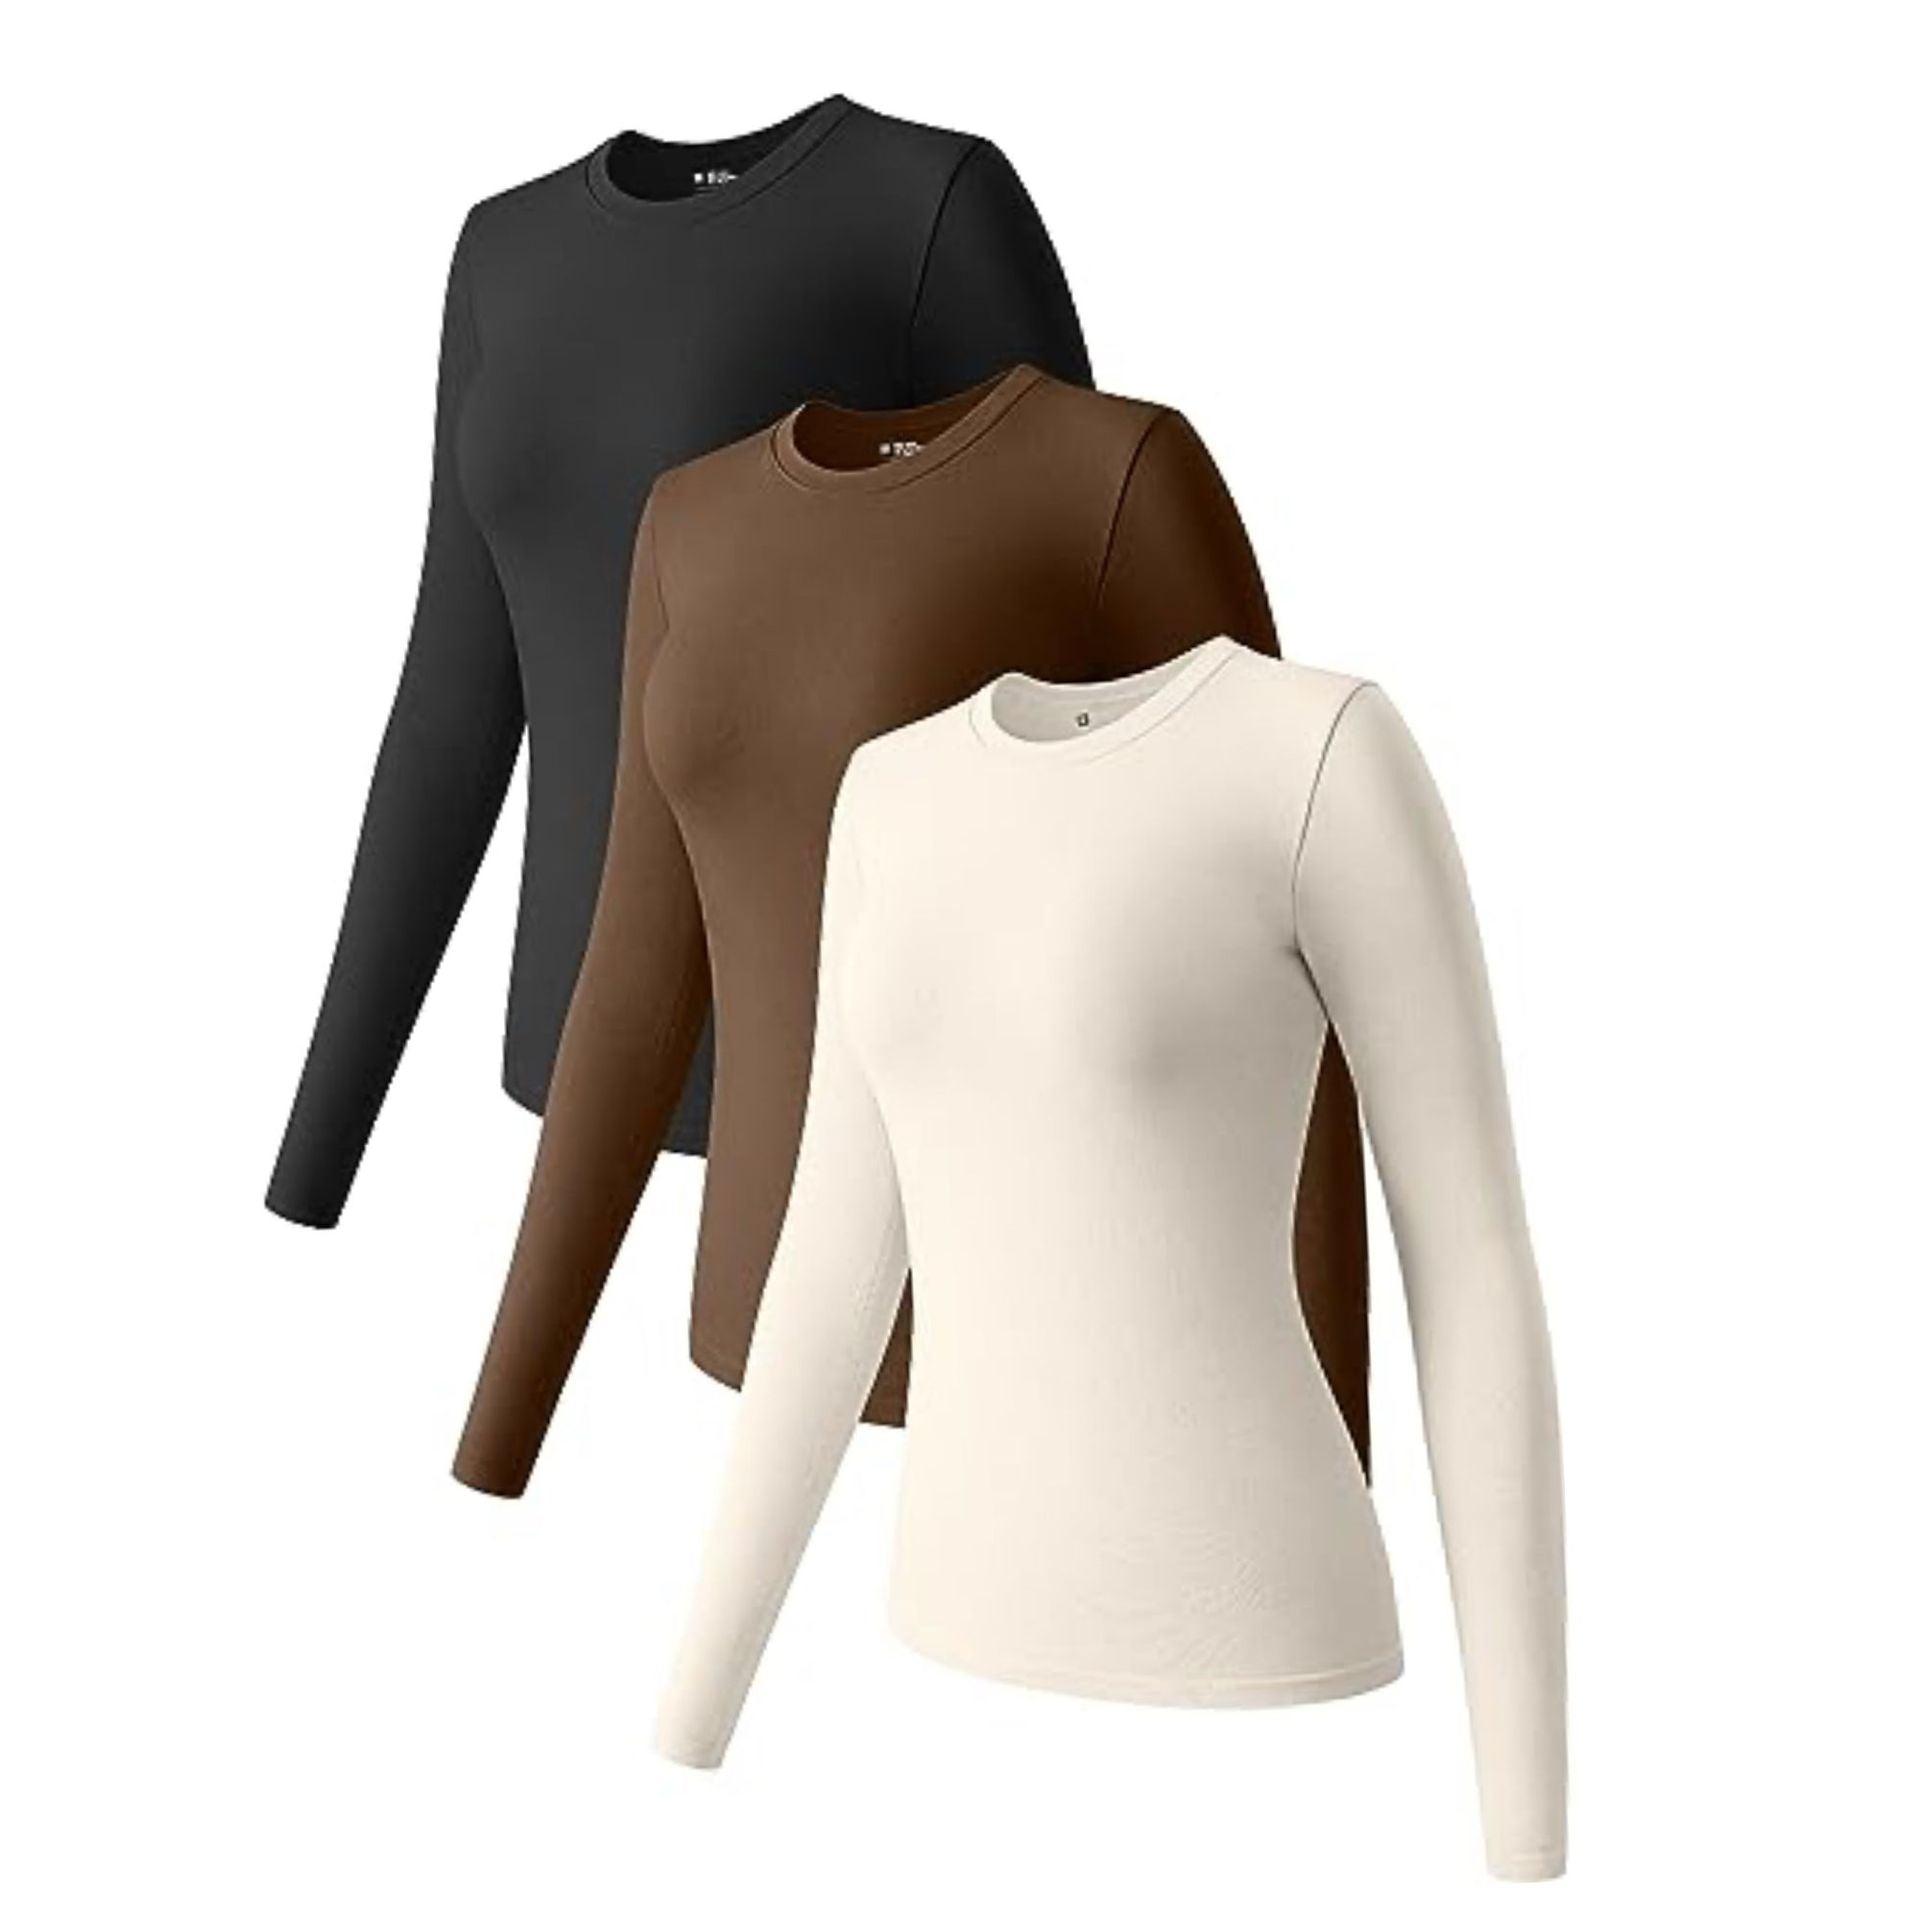 Autumn Winter Long Sleeved Top round Neck Stretch Bottoming Shirt T shirt Top for Girls